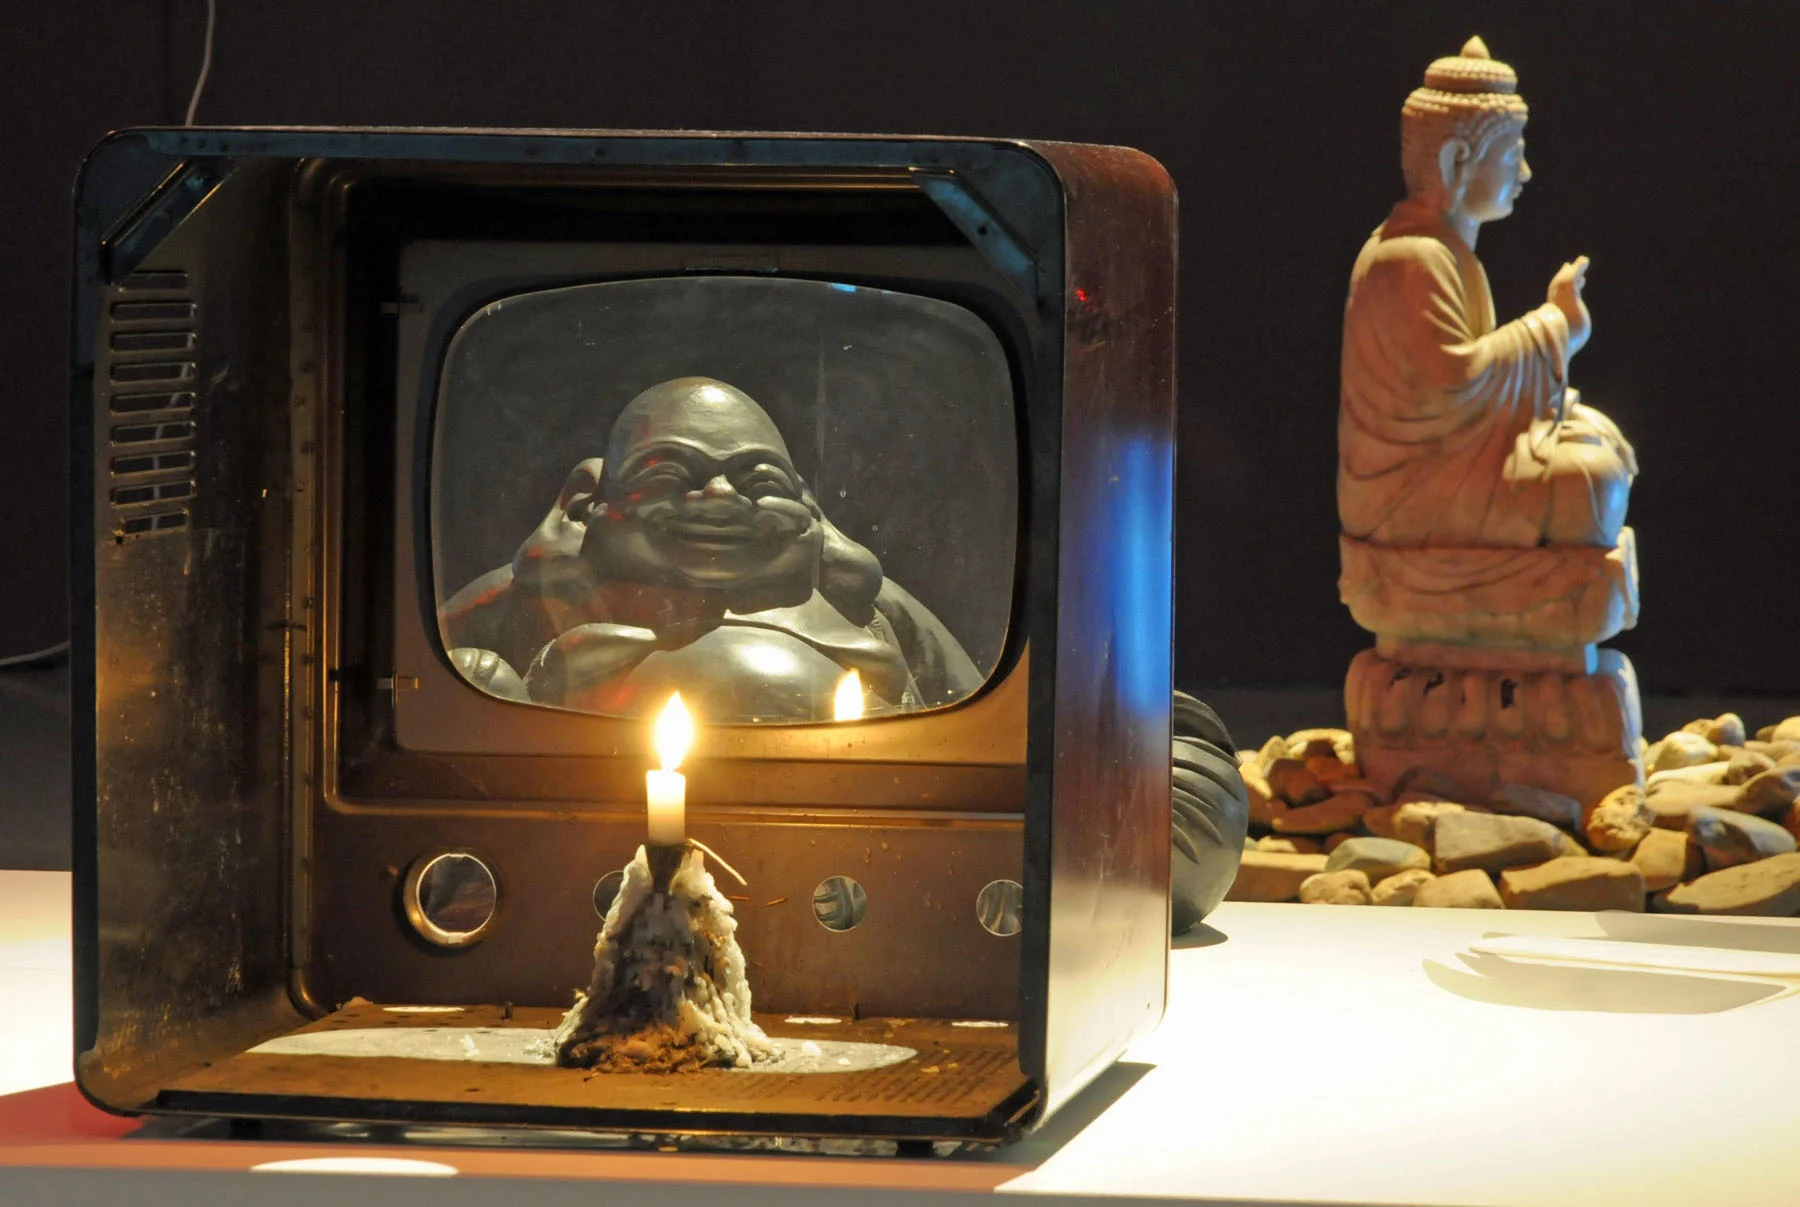 A hollowed-out television holds a burning wax candle. Visible through the screen is a small statue of a smiling Buddha. In the background, on a small pile of pebbles, is another figurine.